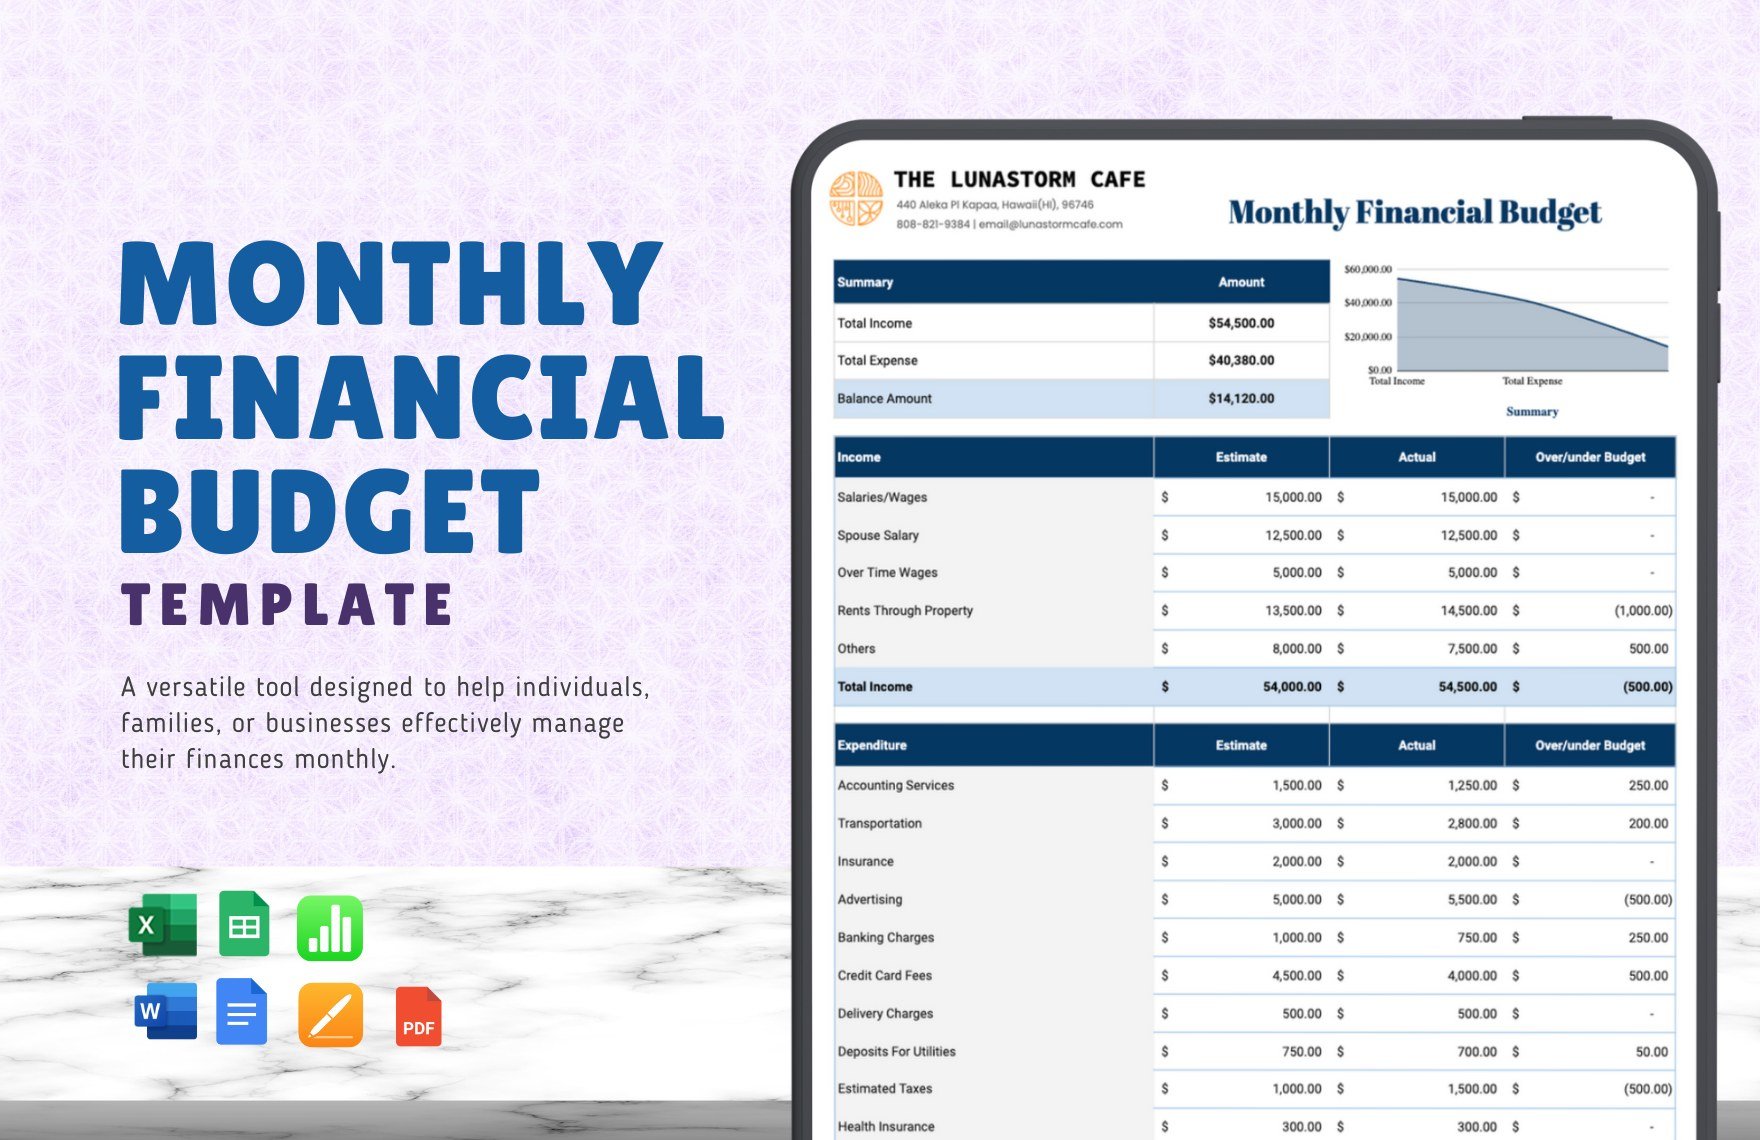 Monthly Financial Budget Template